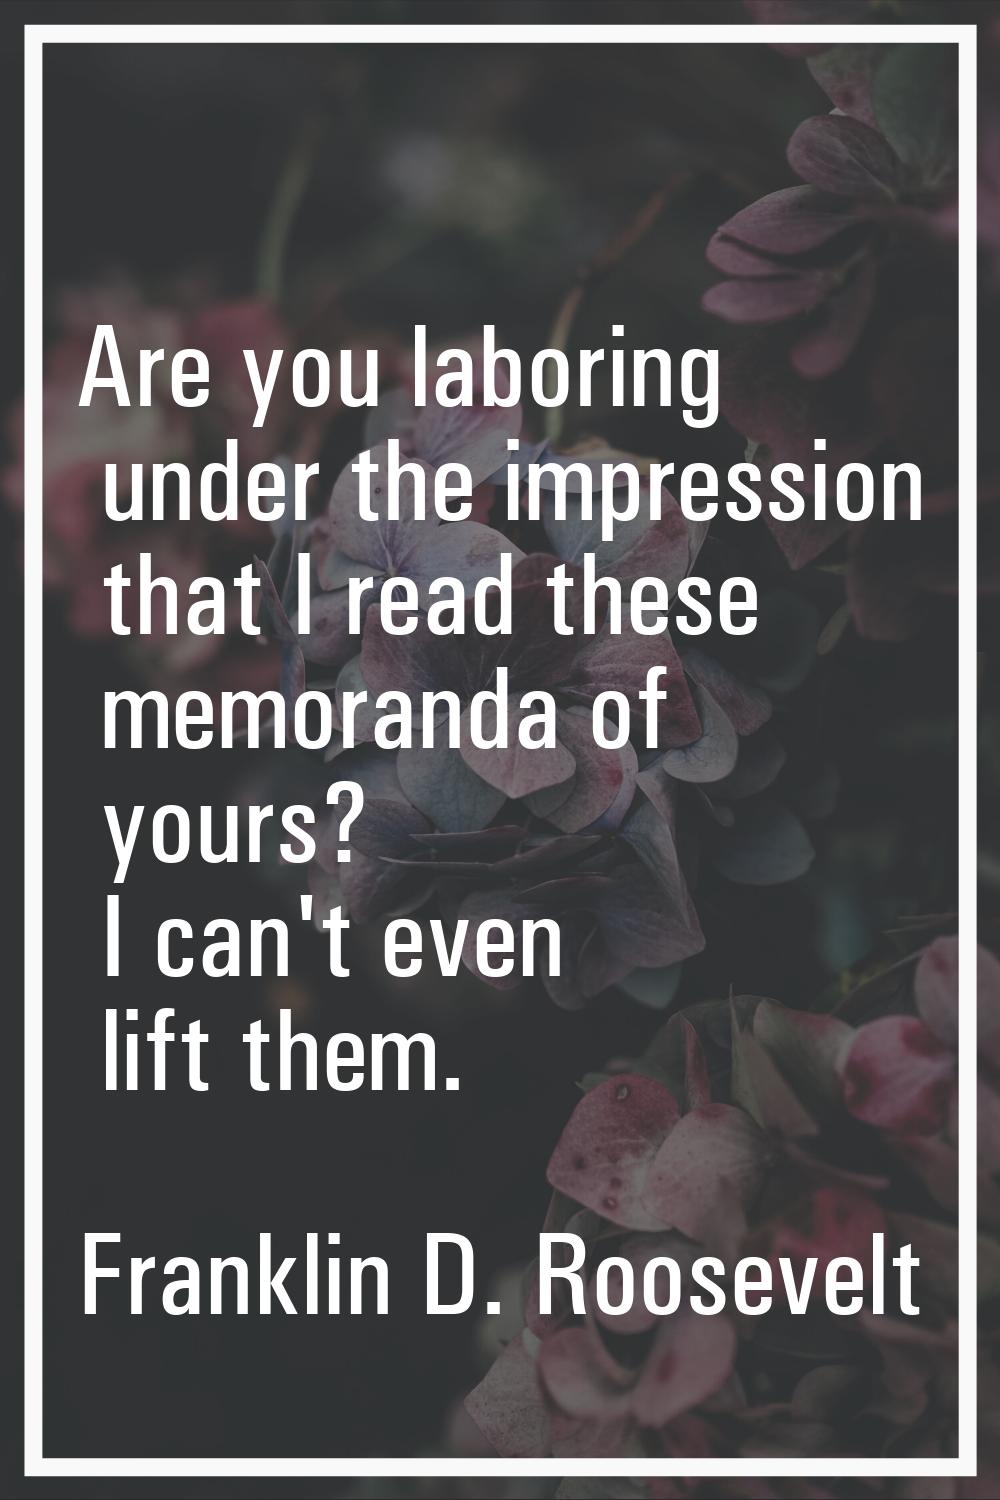 Are you laboring under the impression that I read these memoranda of yours? I can't even lift them.